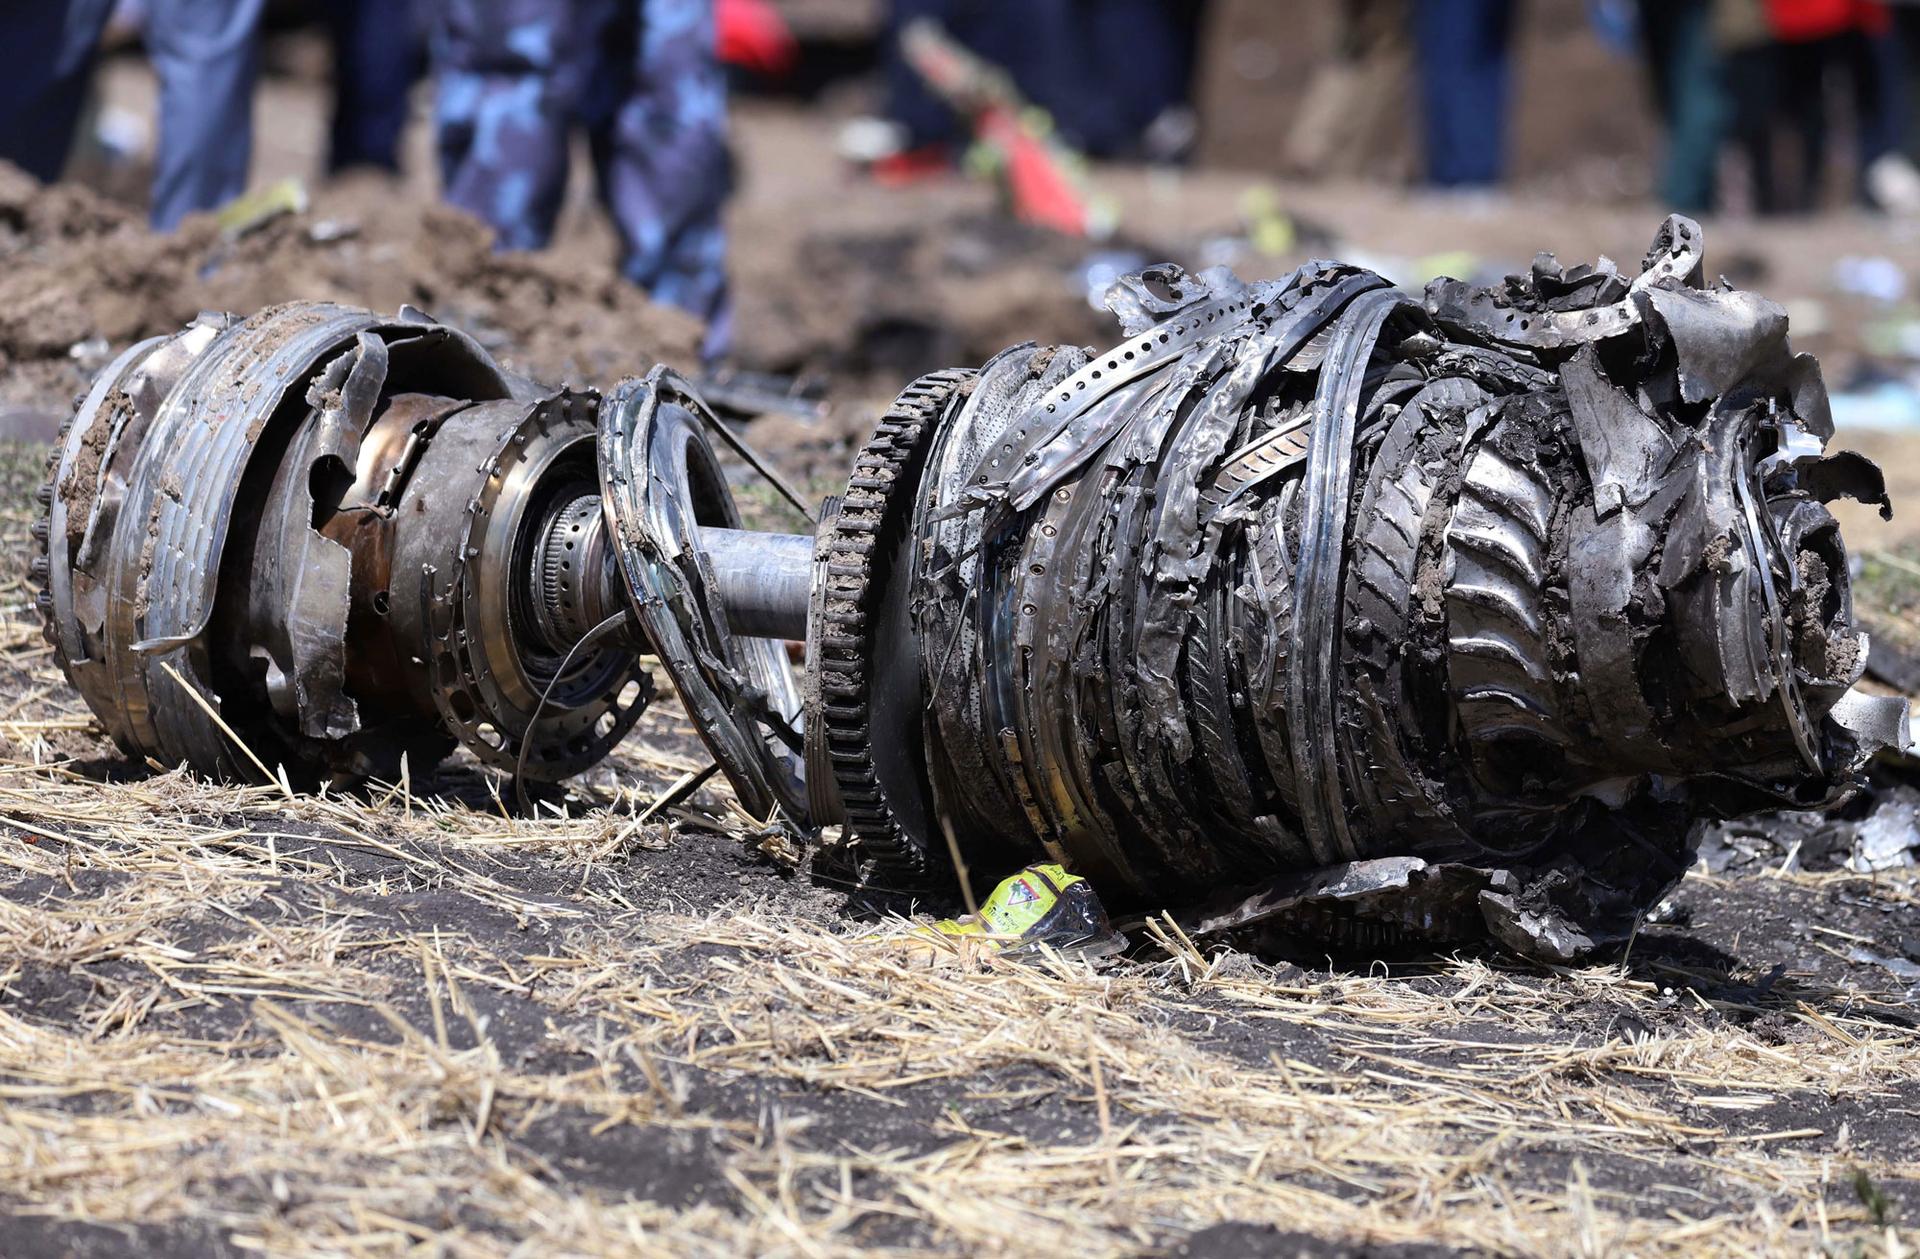 Large metal airplane engine parts are shown laying on the ground in Ethiopia.